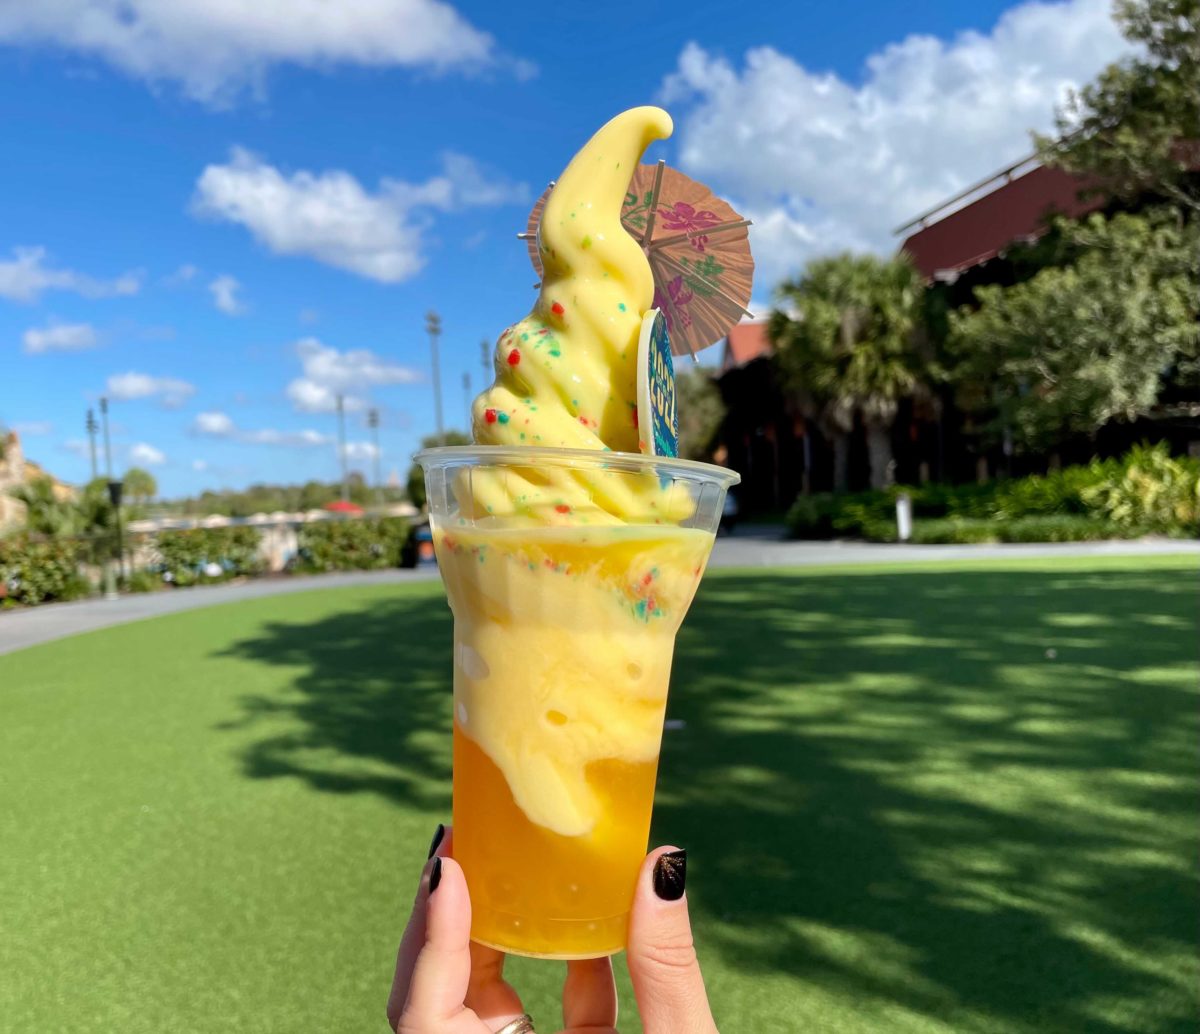 new-years-pineapple-dole-whip-float-7-7816588